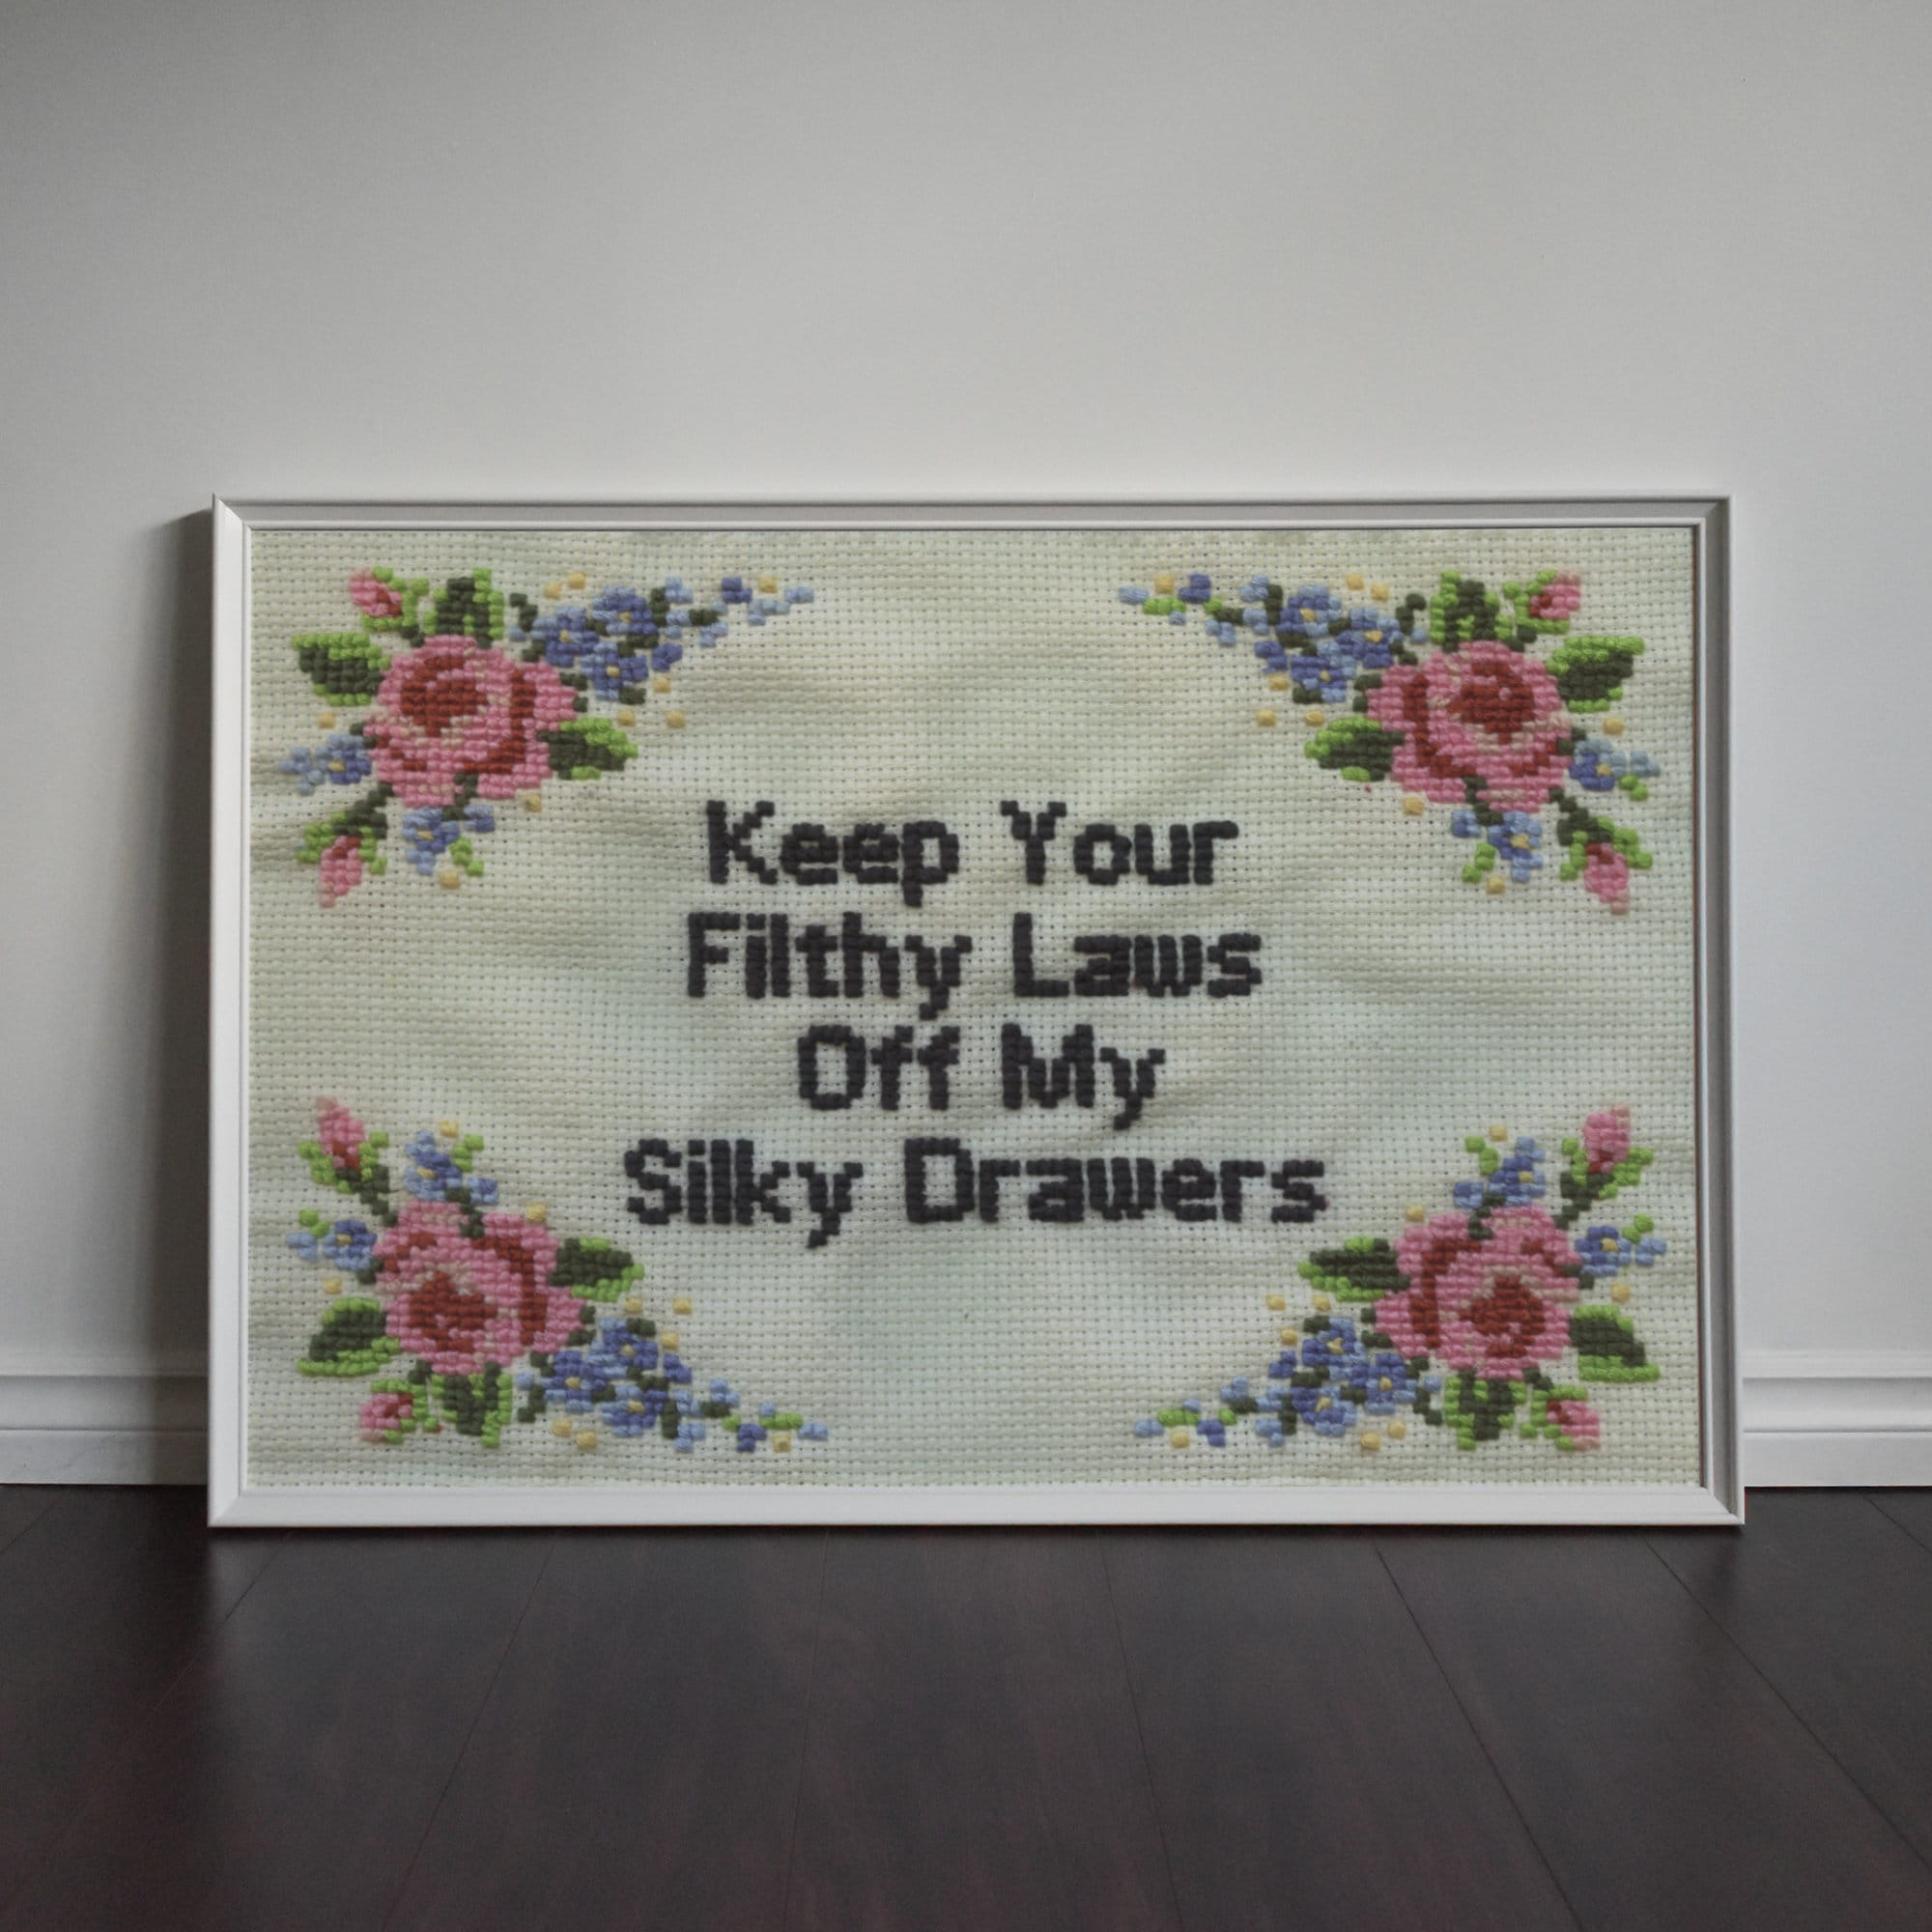 Women's Rights and Pro Choice Feminist Art Print feat Cross Stitch Design of 'Filthy Laws' Protest Sign from Women's March